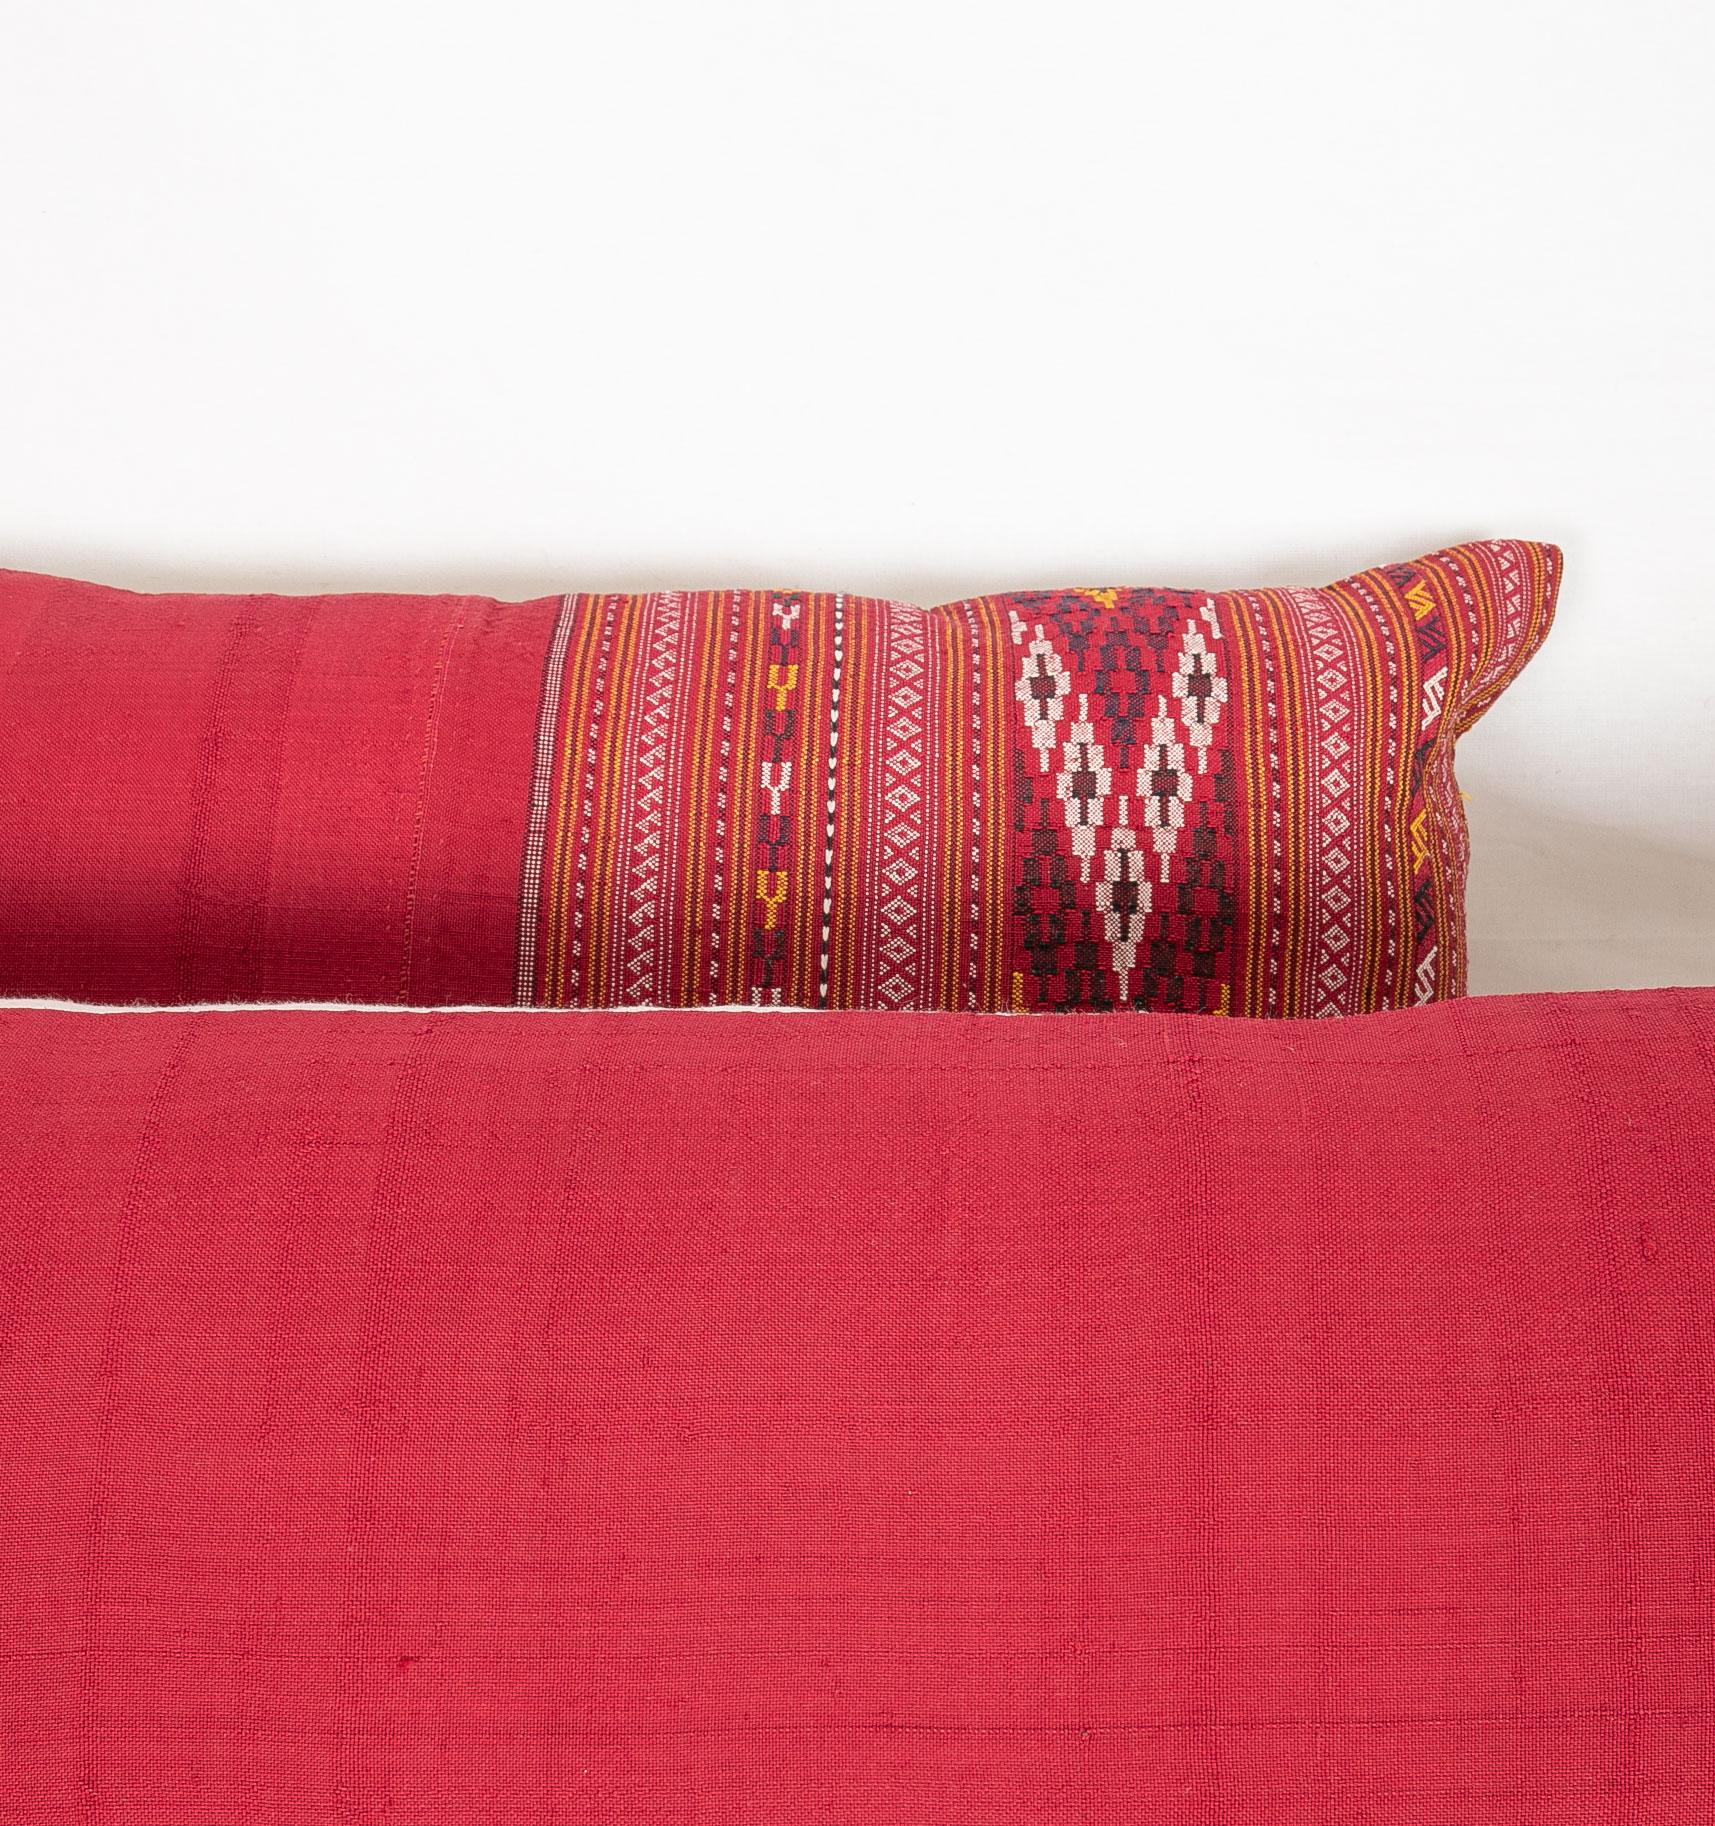 Hand-Woven Lumbar Pillow Cases Fashioned from an Early 20th Century Turkmen Shawl